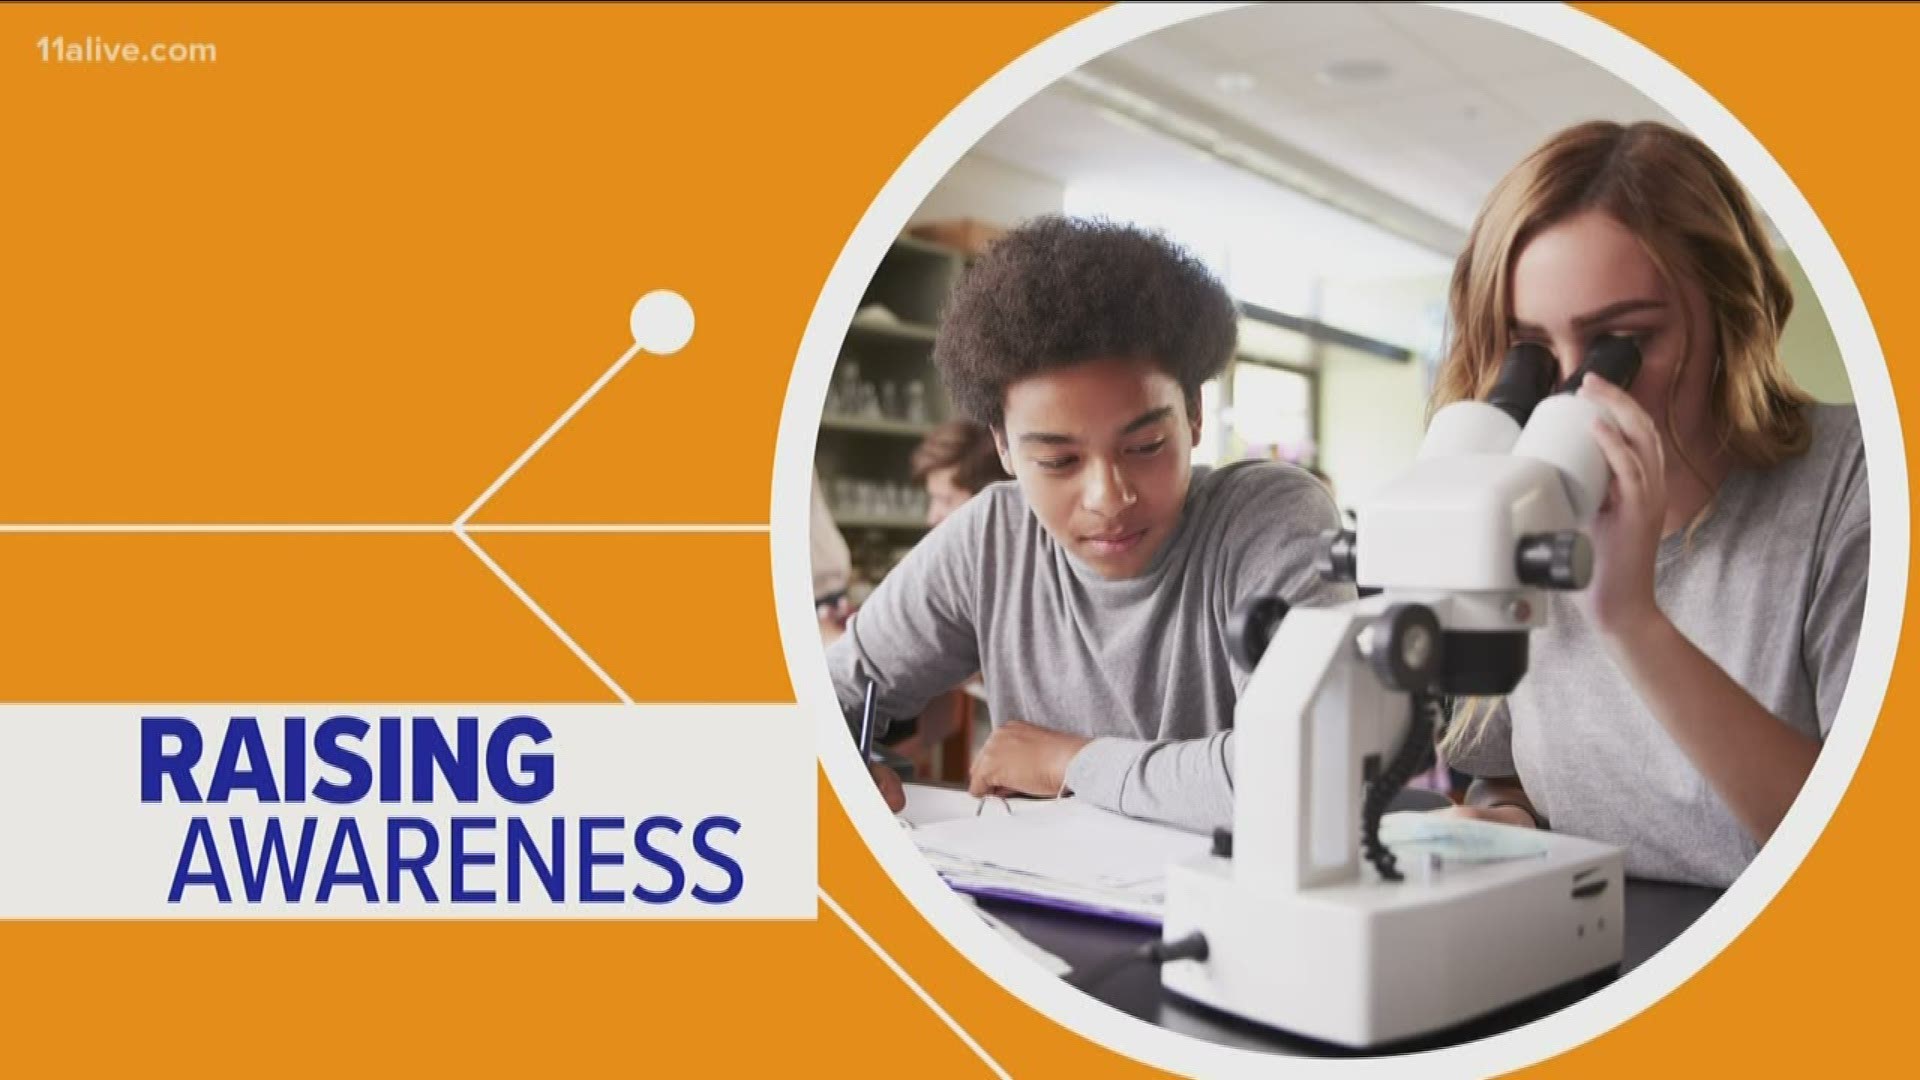 The study showed that some students were discouraged from being in the scientific field based on race. Now, researchers are working to raise awareness about it. Jerry Carnes brings you the latest connect the dots.